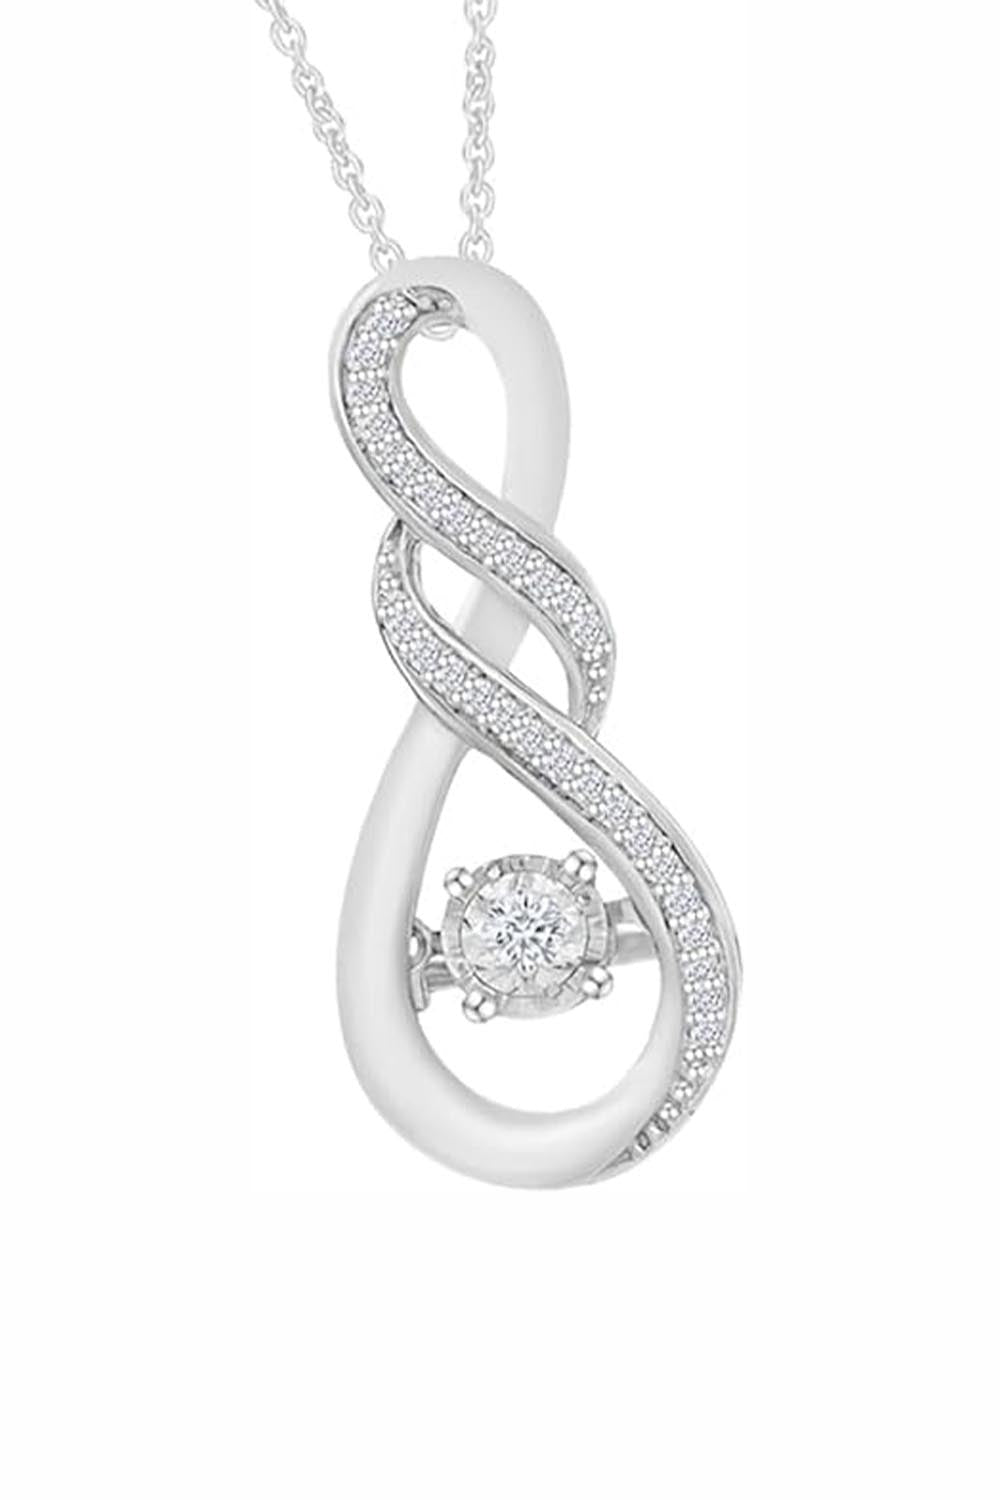 White Gold Color Yaathi Double Infinity Pendant Necklace, Jewellery